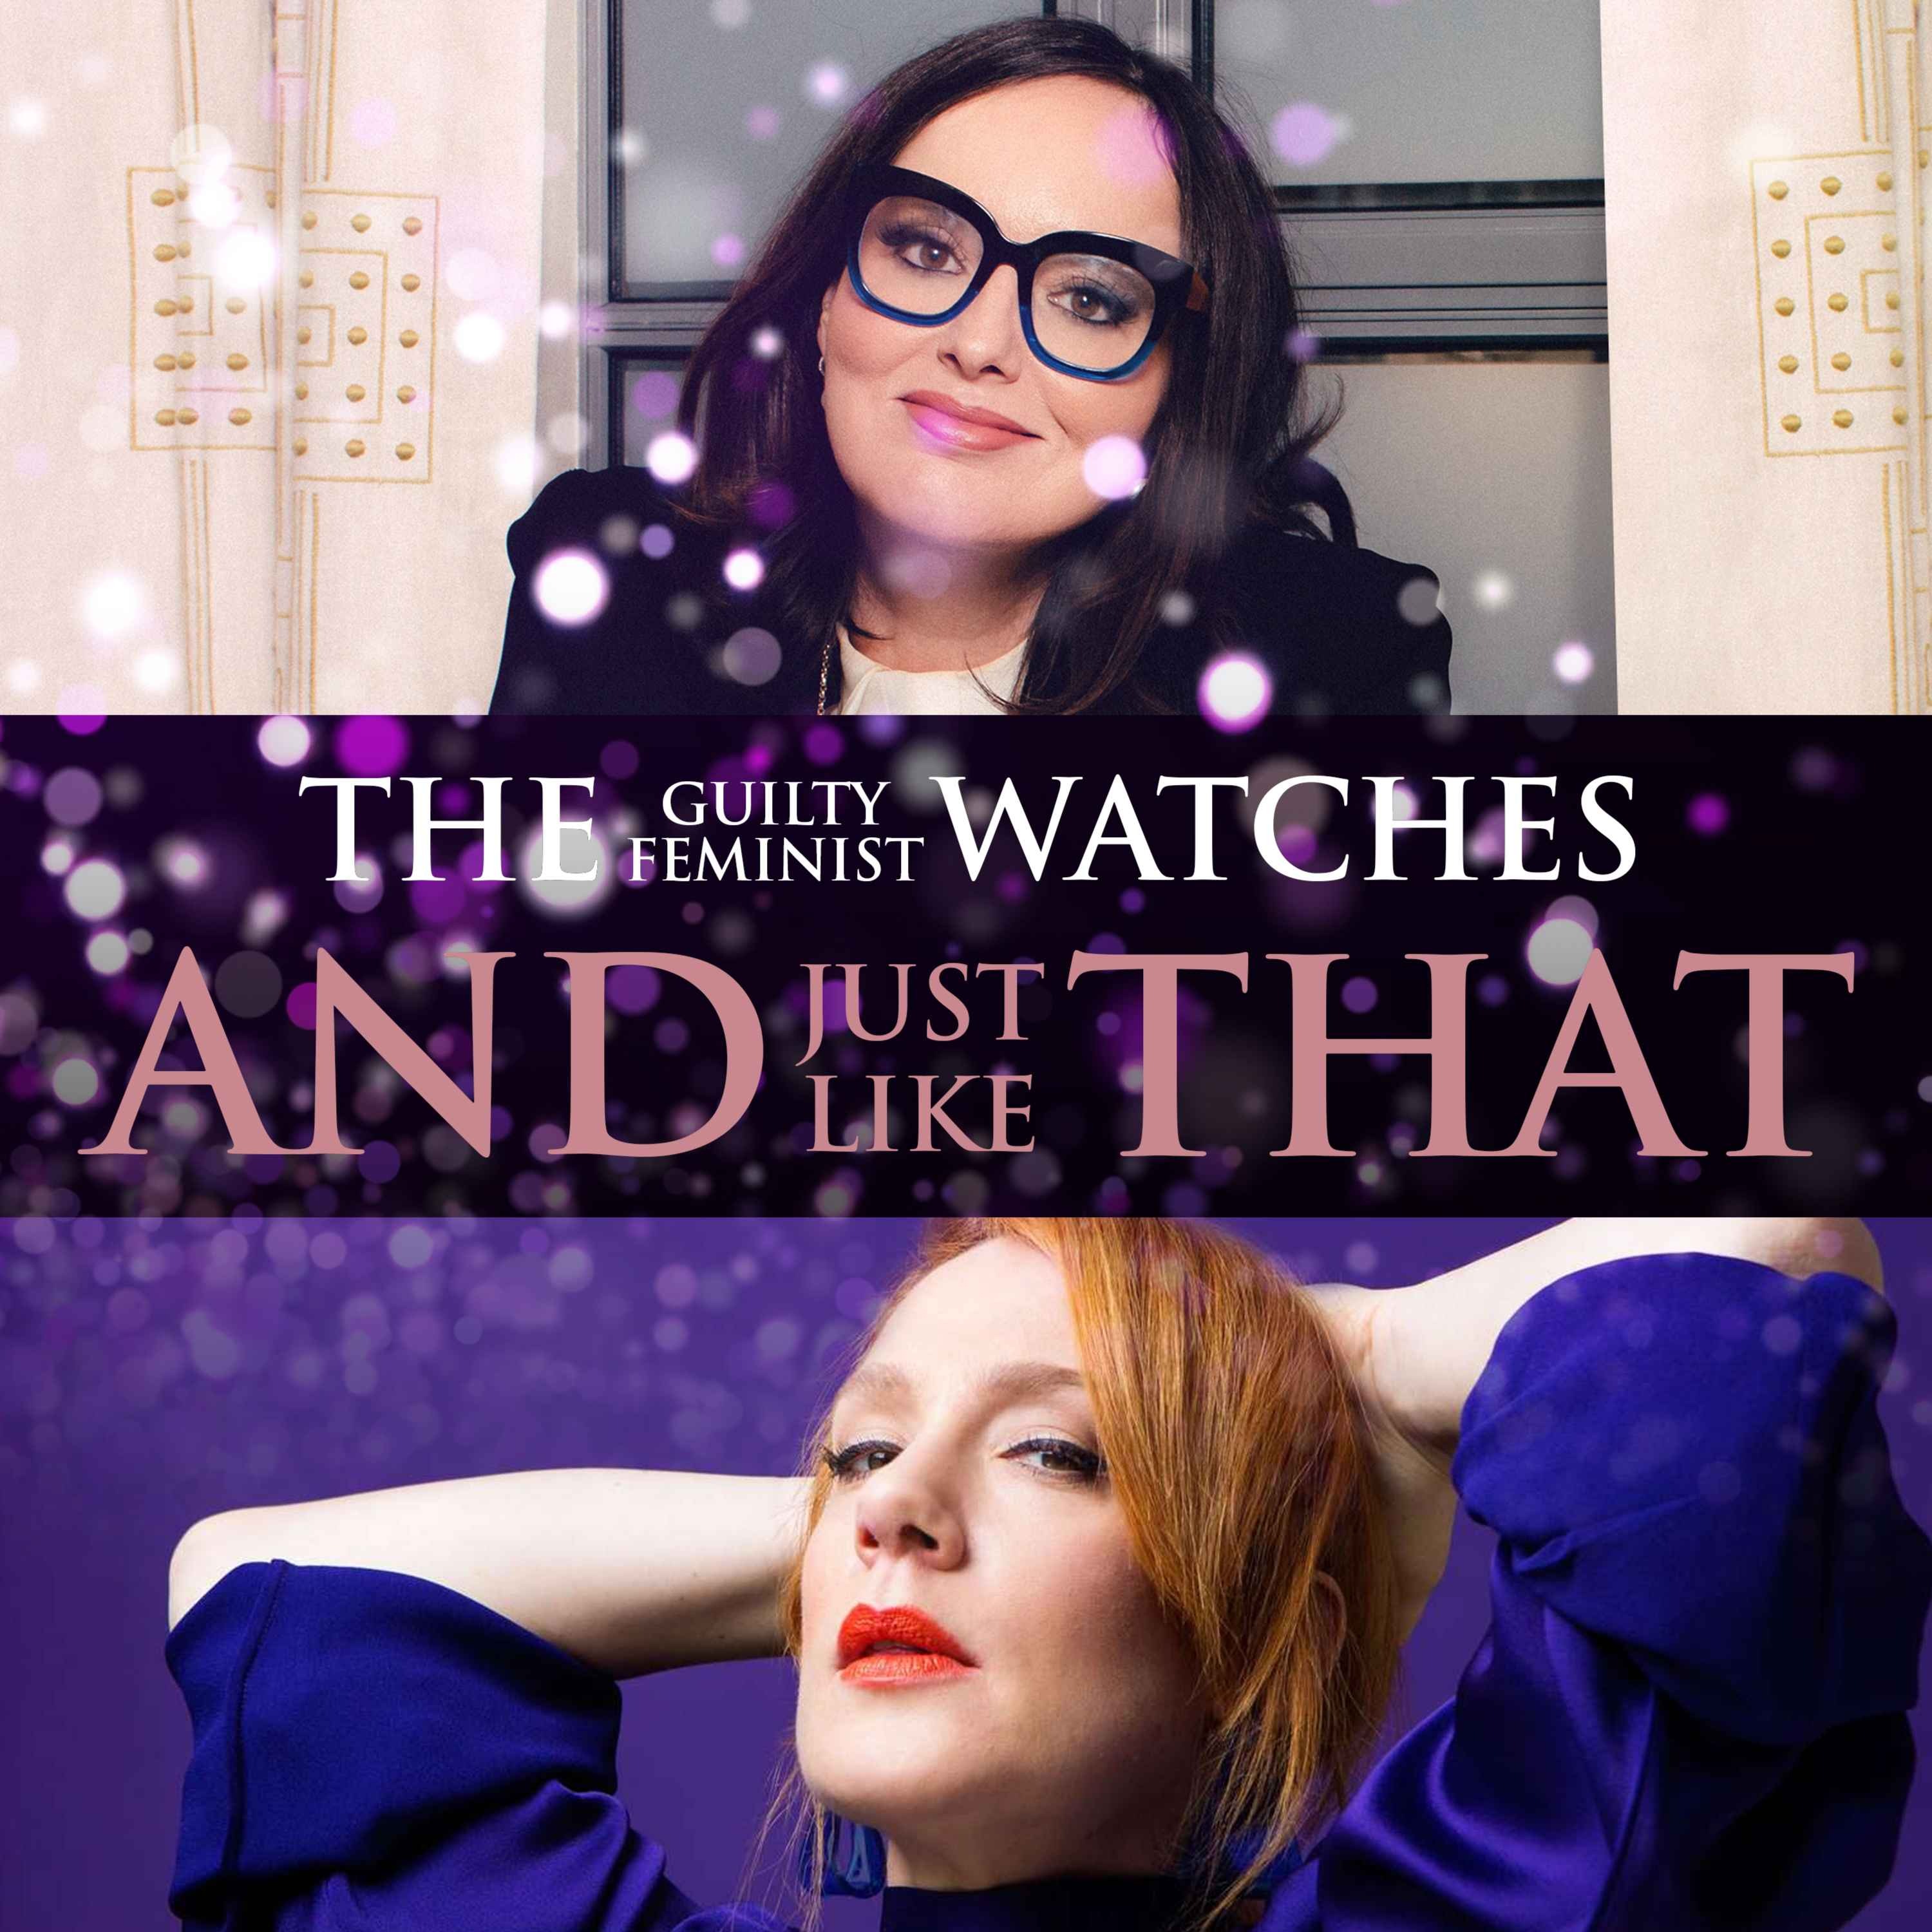 The Guilty Feminist watches And Just Like That - Episodes 1 and 2 with Sara Barron